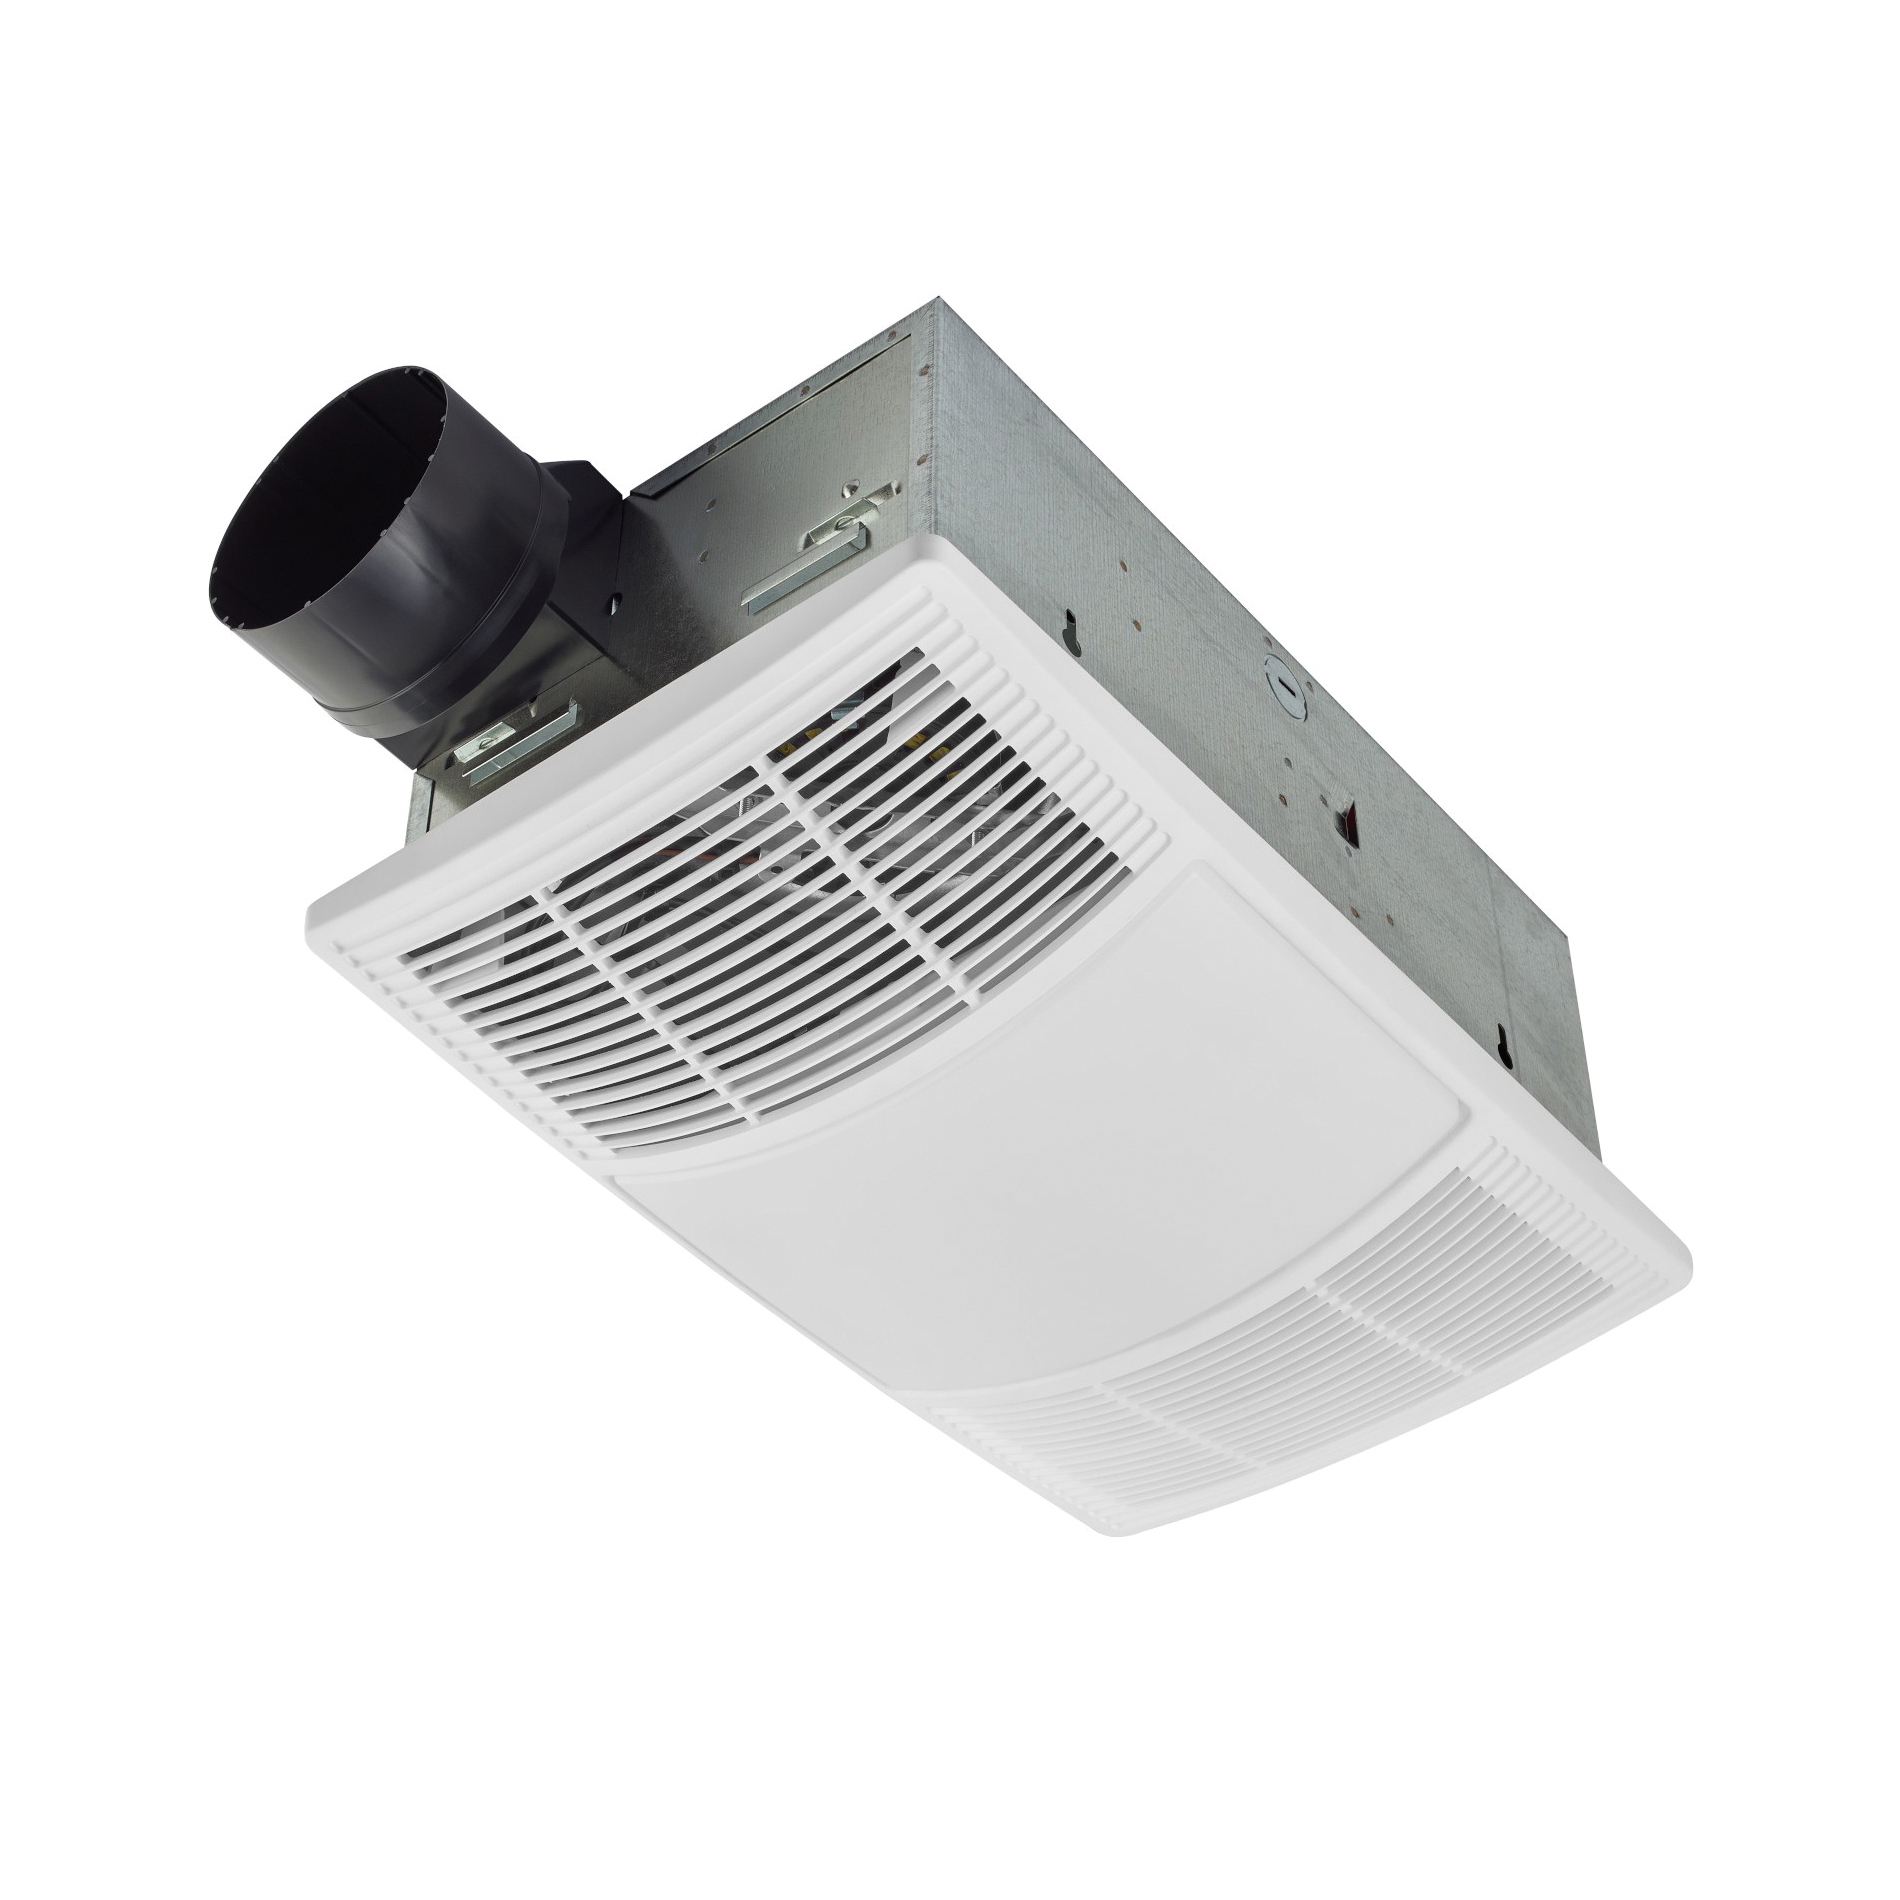 PowerHeat Series BHFLED80 Heater Exhaust Fan, 12 A, 120 V, 80 cfm Air, 1.5 sones, LED Lamp, Infrared/Radiant